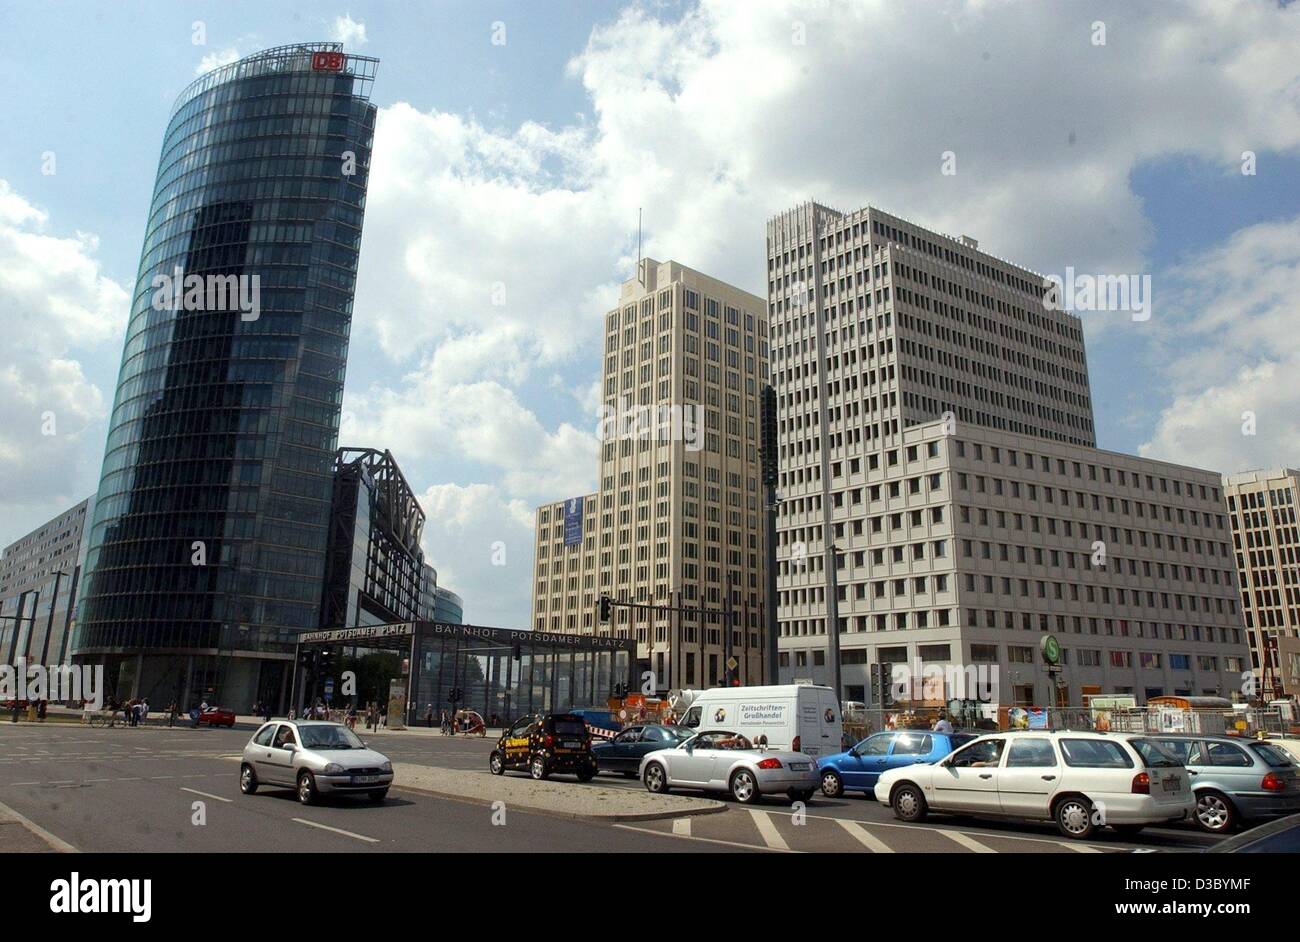 (dpa) - A view of the new buildings, the 100 m high Sony Center (L) and the highrise buildings of the Beisheim Center, on the Potsdamer Platz (Potsdam square) in central Berlin, 21 July 2003. The Beisheim Center is named after its founder, who invested 450 million euros in the construction. The Cent Stock Photo